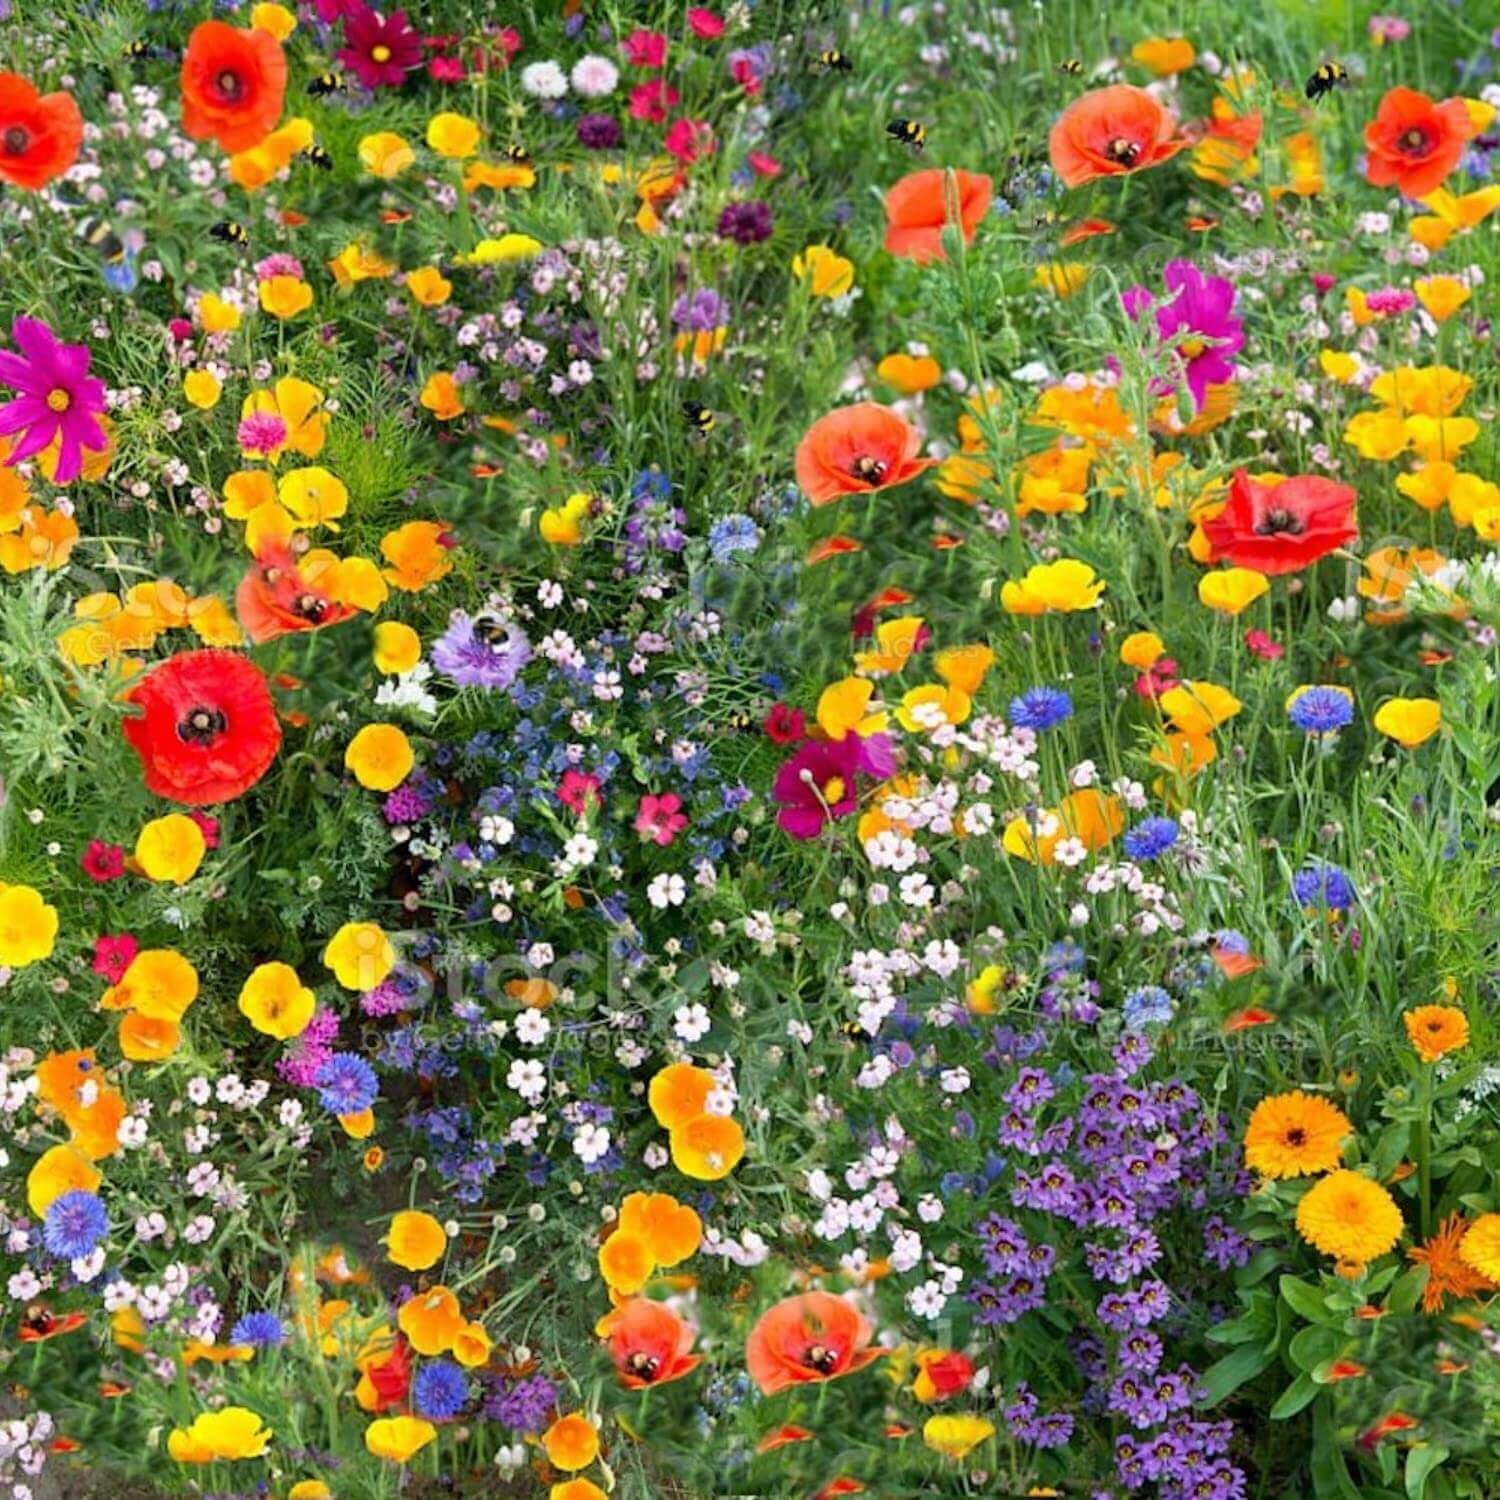 Wildfower mix Pure Flower Mix - 100g Wildflower UK Seeds Attract Bees & Butterflies, No Grass - Genuine Annual Meadow Colors